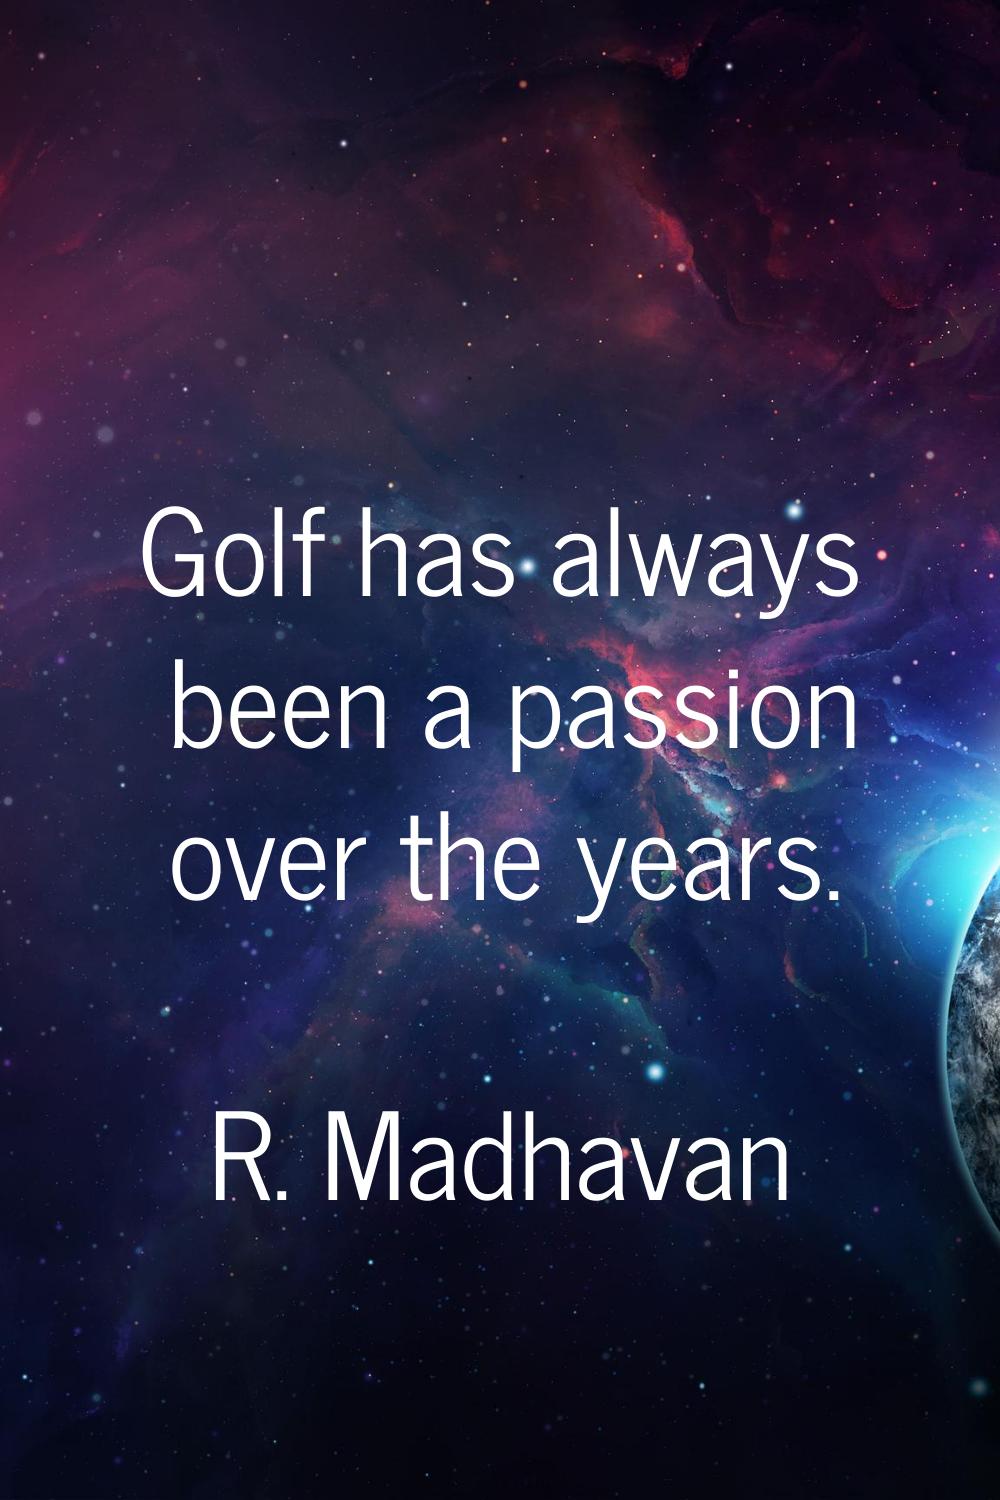 Golf has always been a passion over the years.